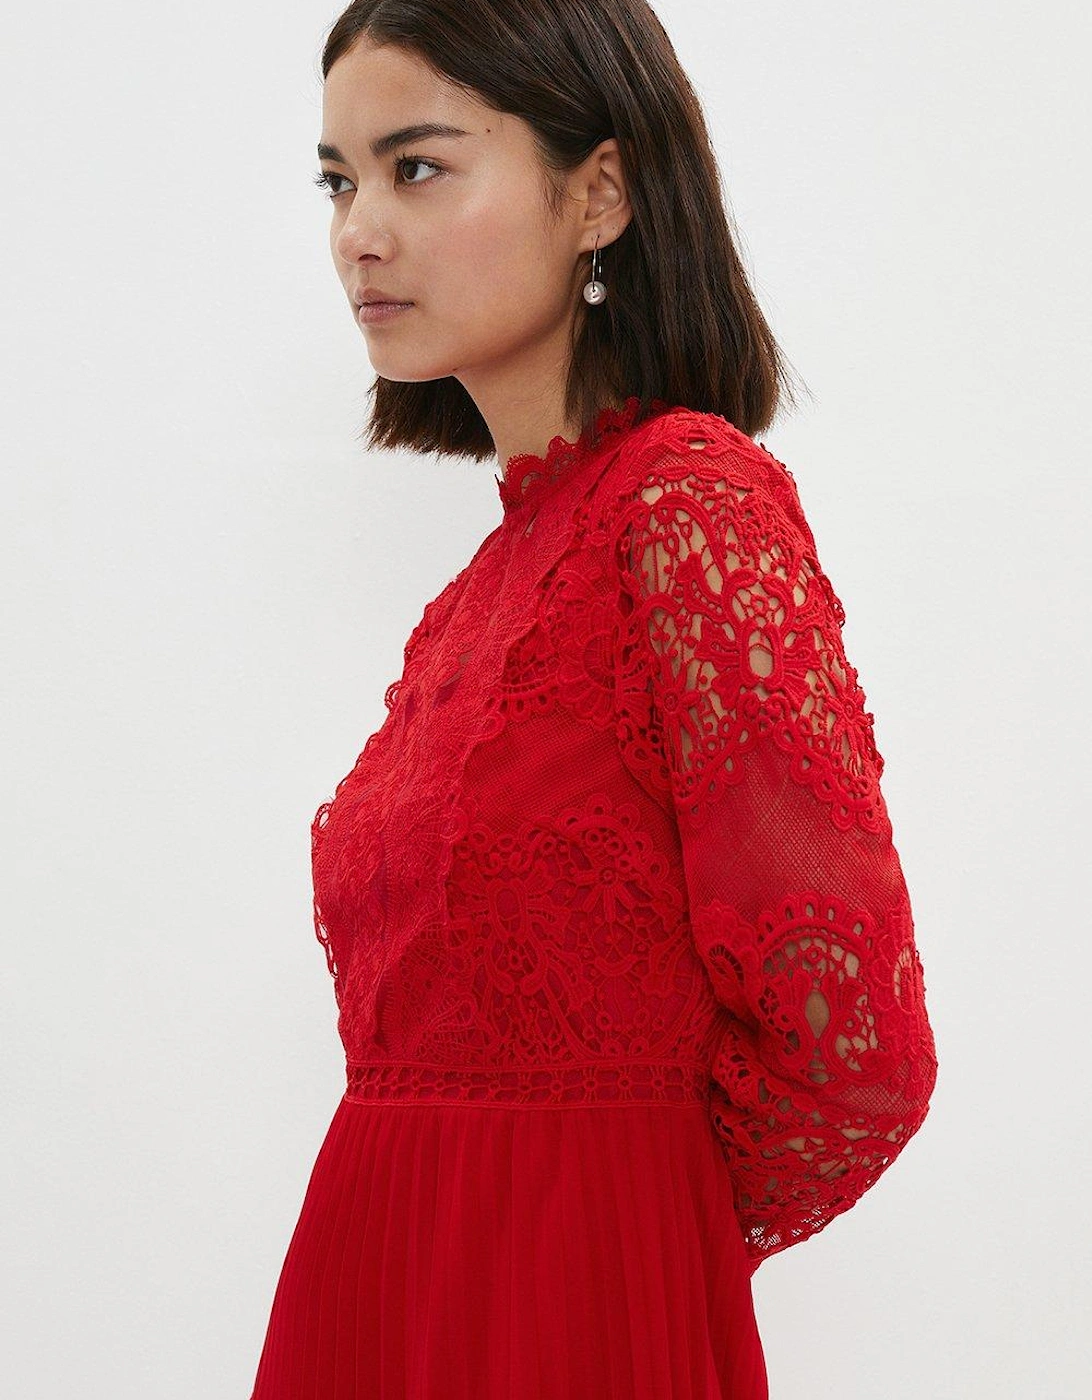 Petite Sleeved Lace High Neck Pleated Dress